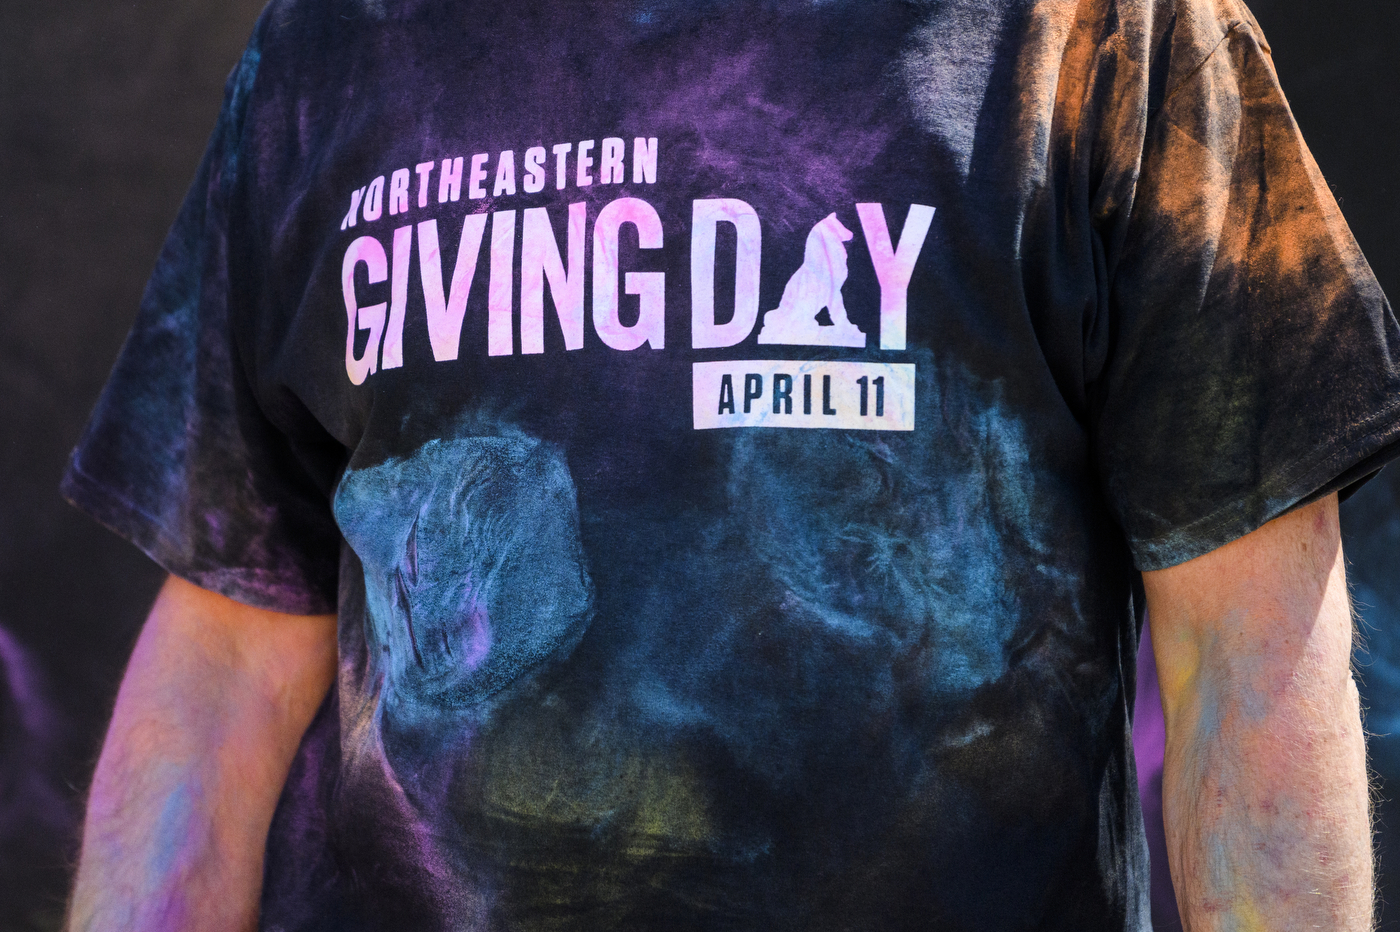 Northeastern giving day t-shirt